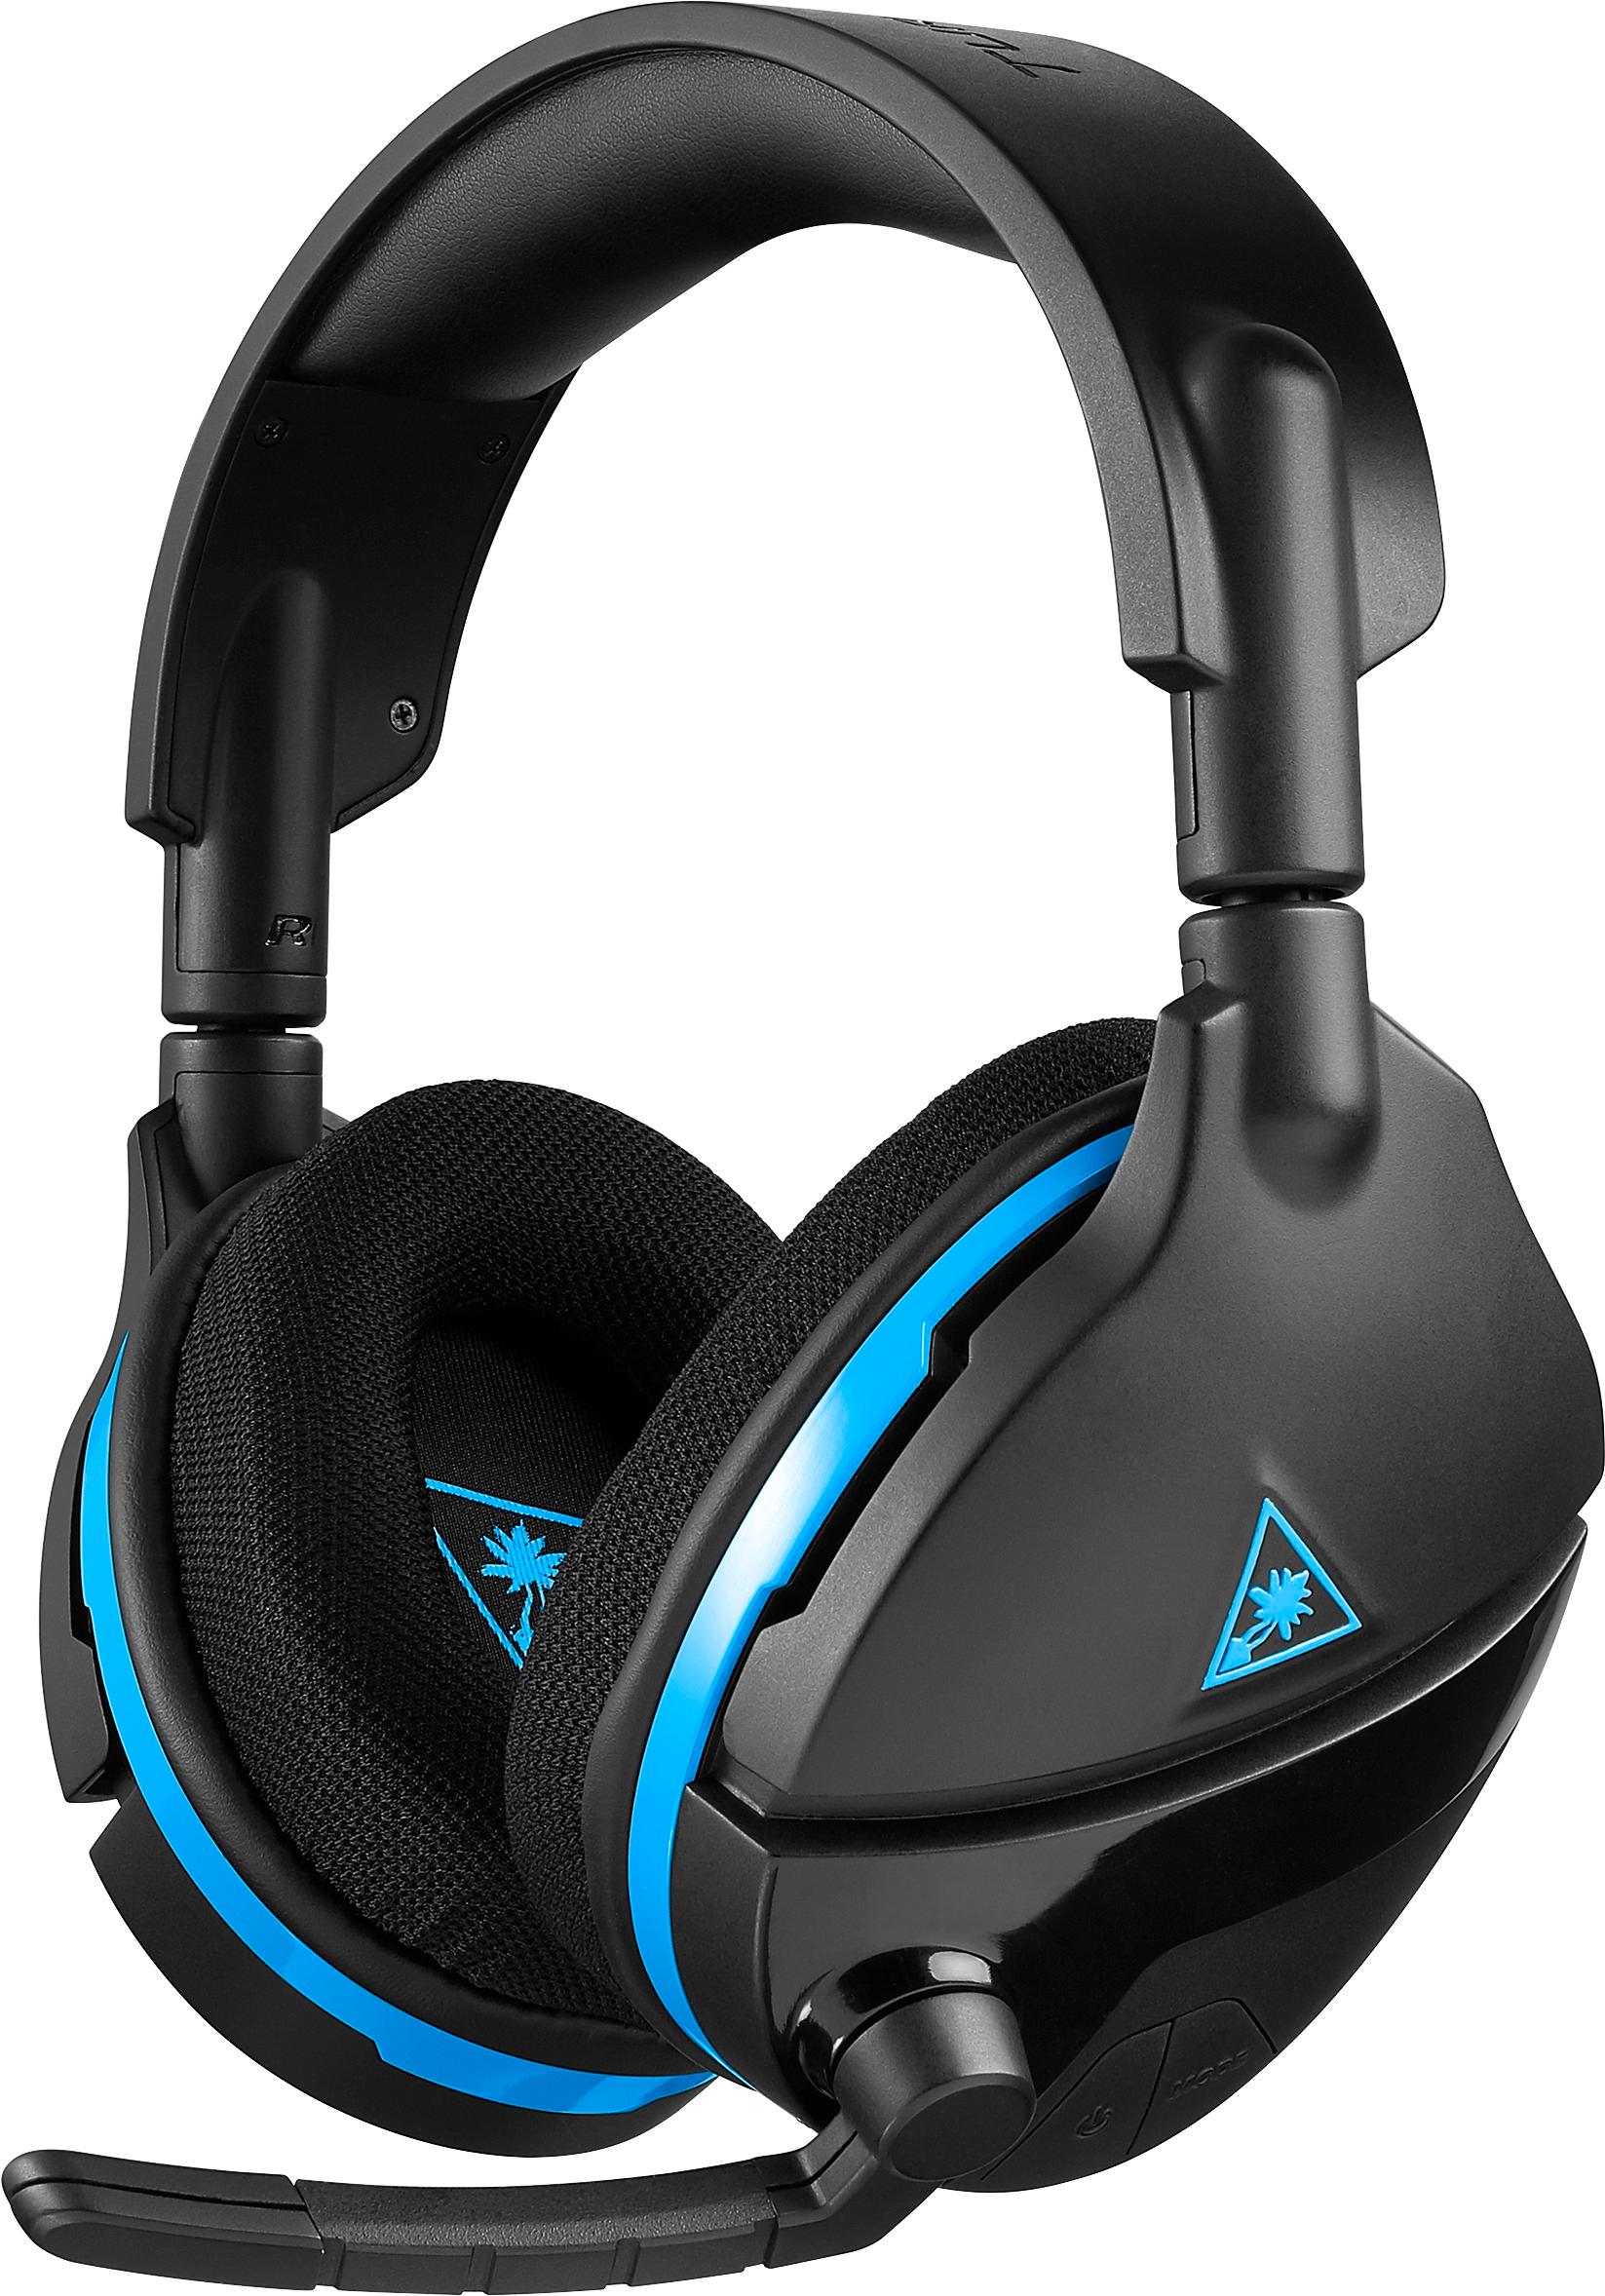  Turtle Beach - Stealth 520 Premium Fully Wireless Gaming  Headset PS4 Pro PS4 & PS3 (Discontinued by Manufacturer) : Video Games